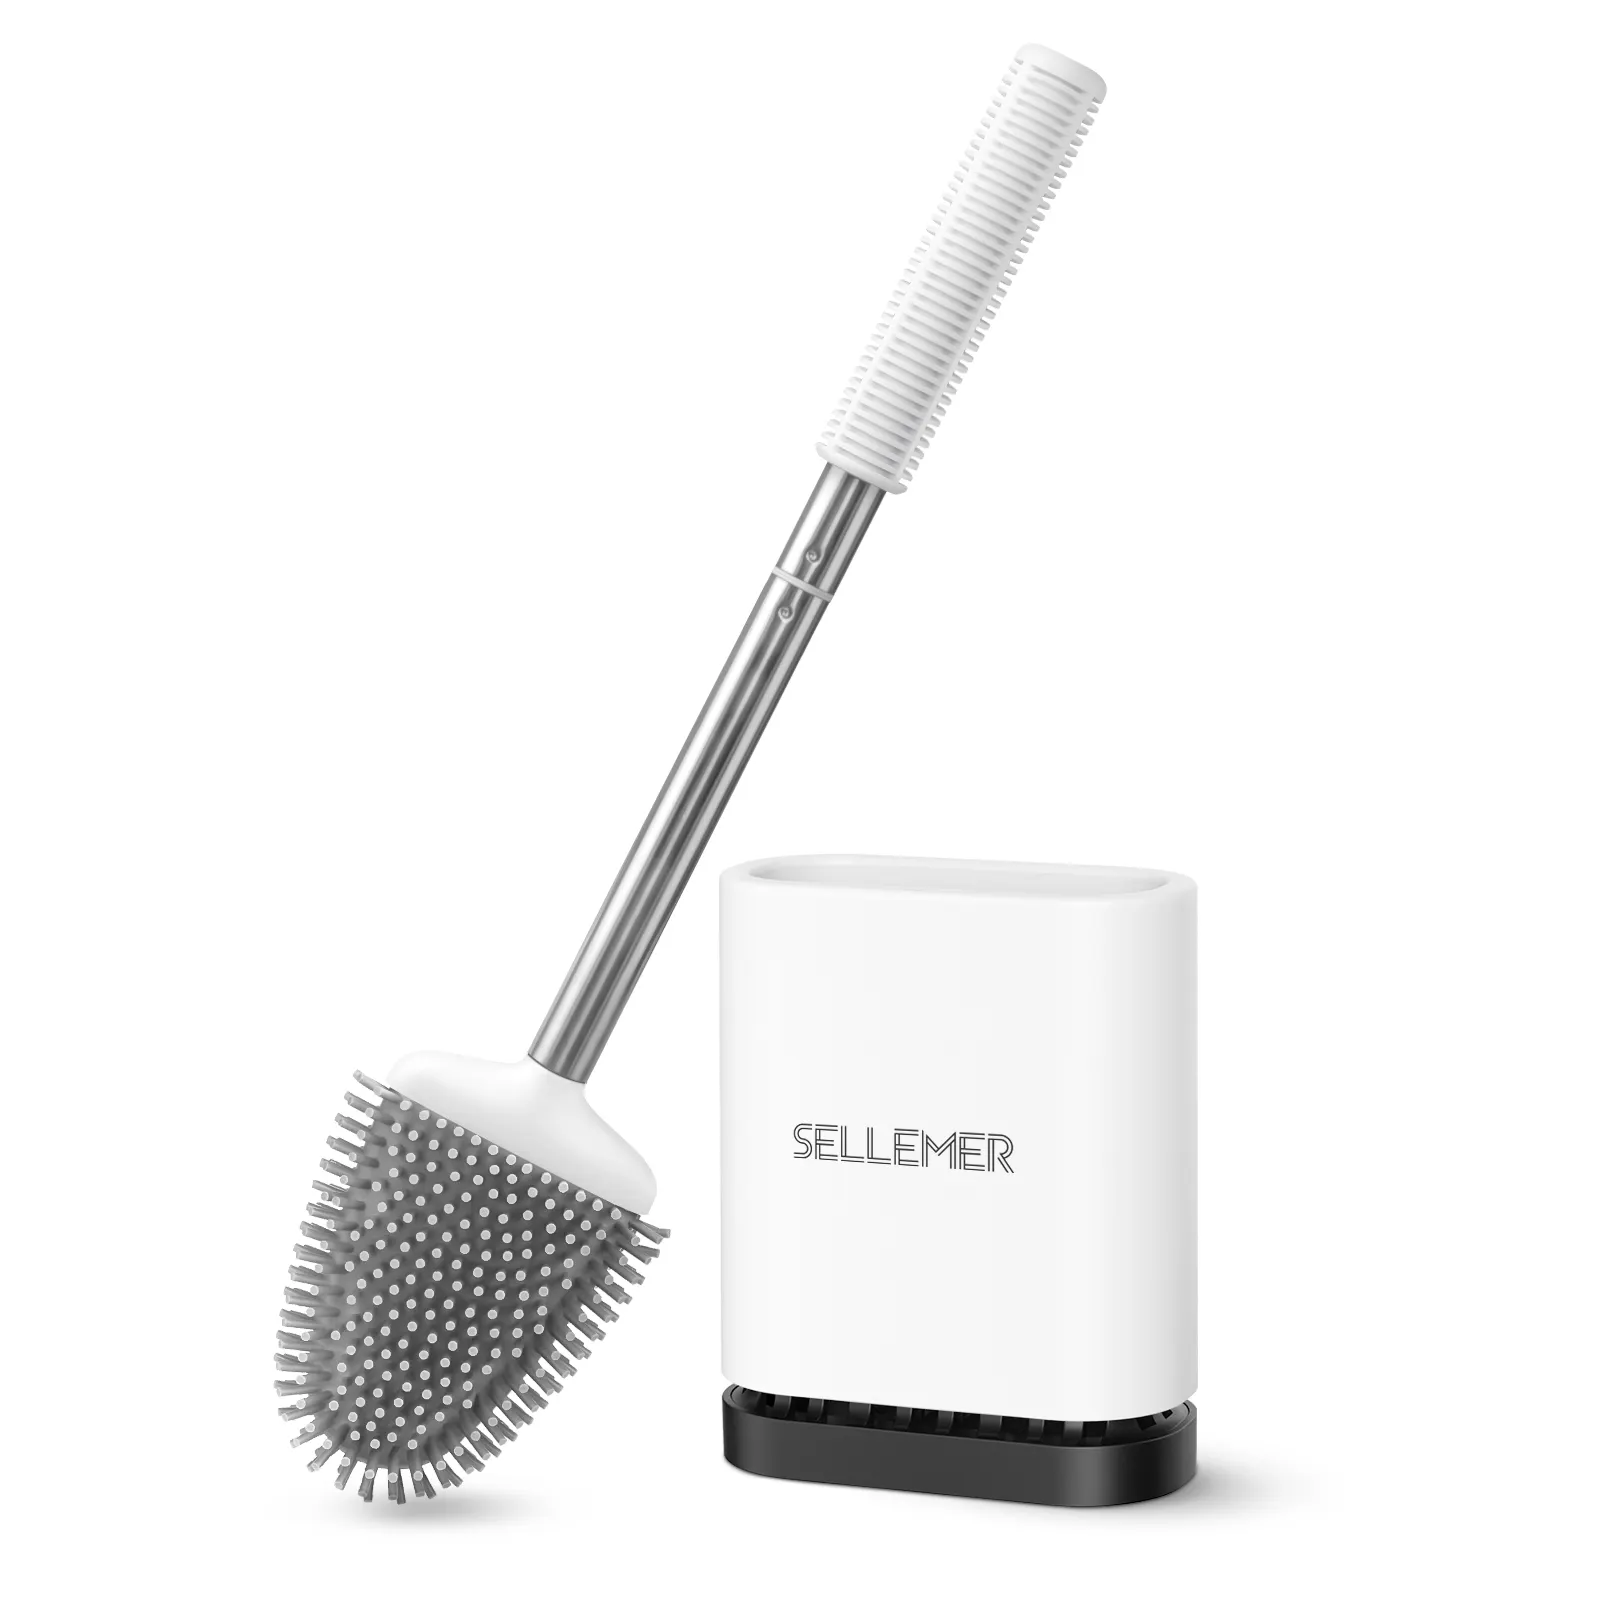 Sellemer Toilet Brush and Holder Set for Bathroom Toilet Bowl Brush Head with Stainless Steel Handle Silicone toilet brush